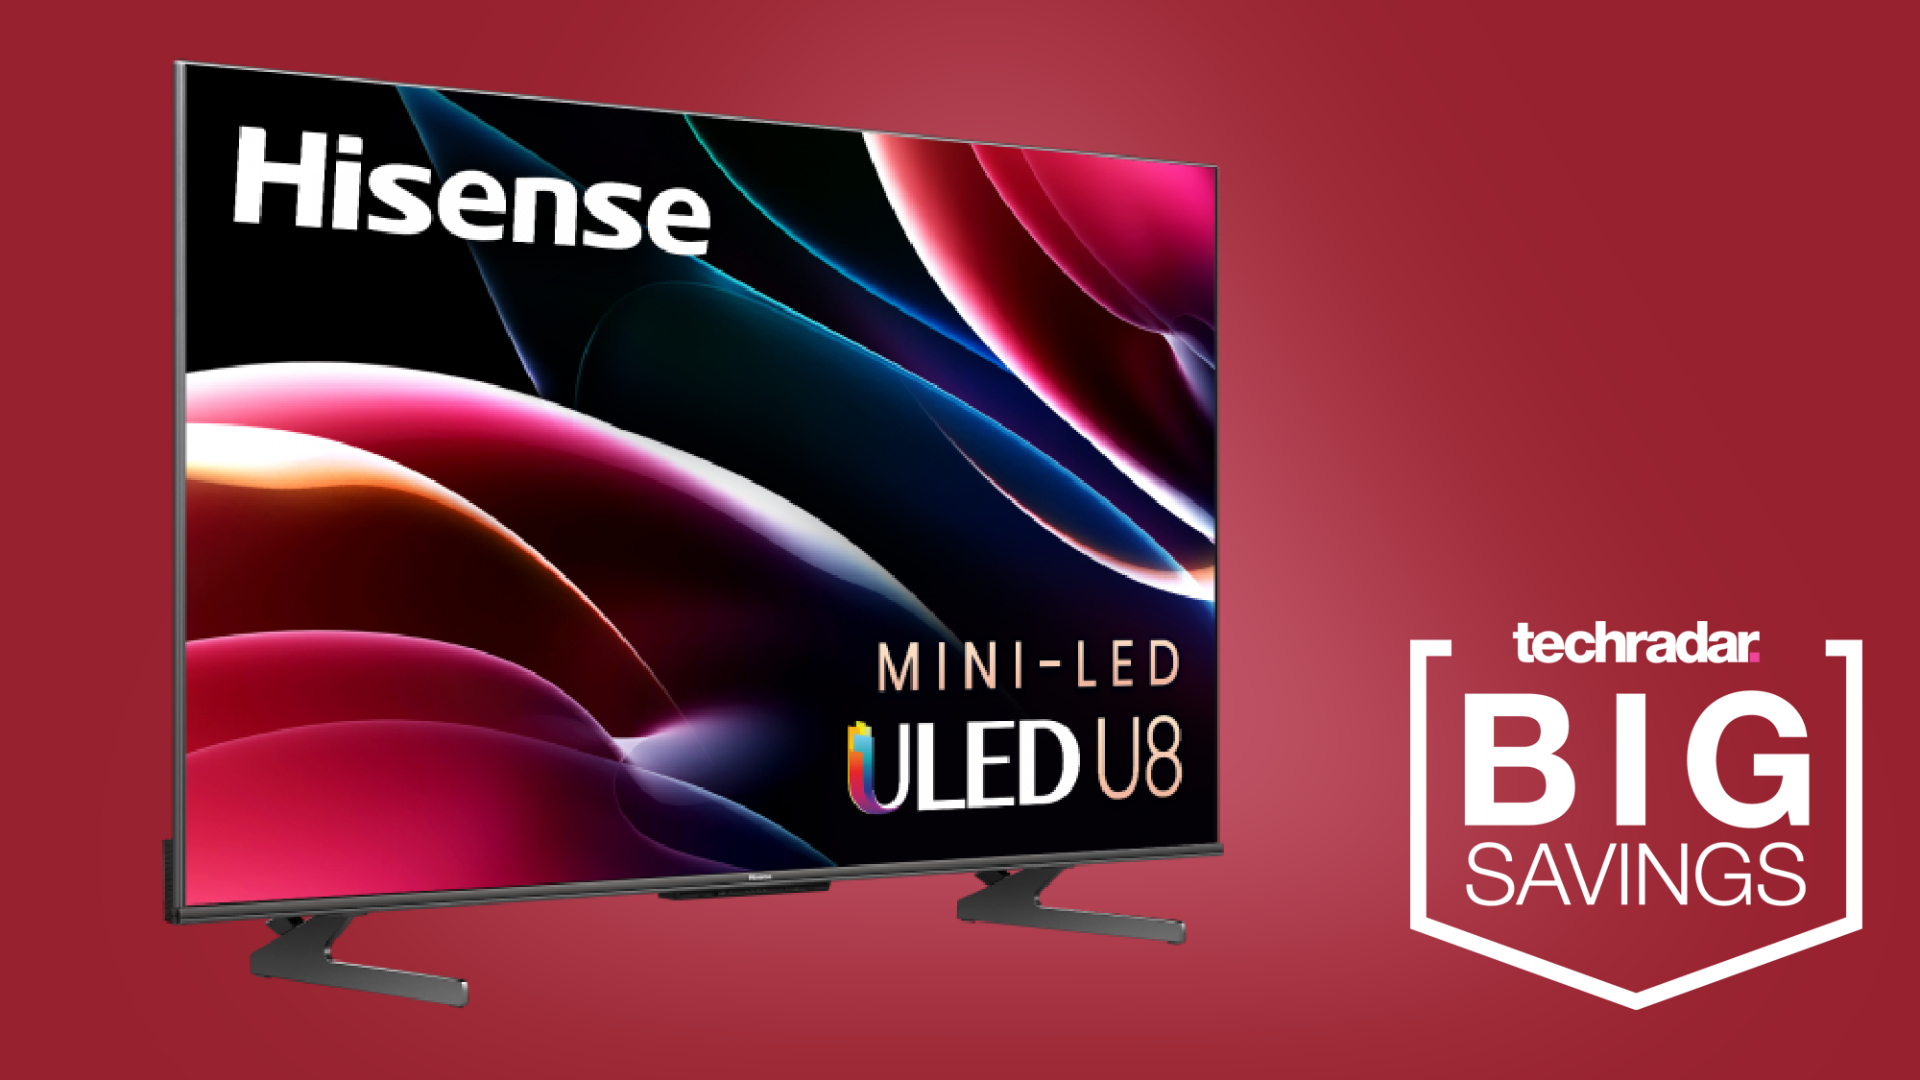 Hisense U8H Black Friday spotlight deal graphic with TV against red background